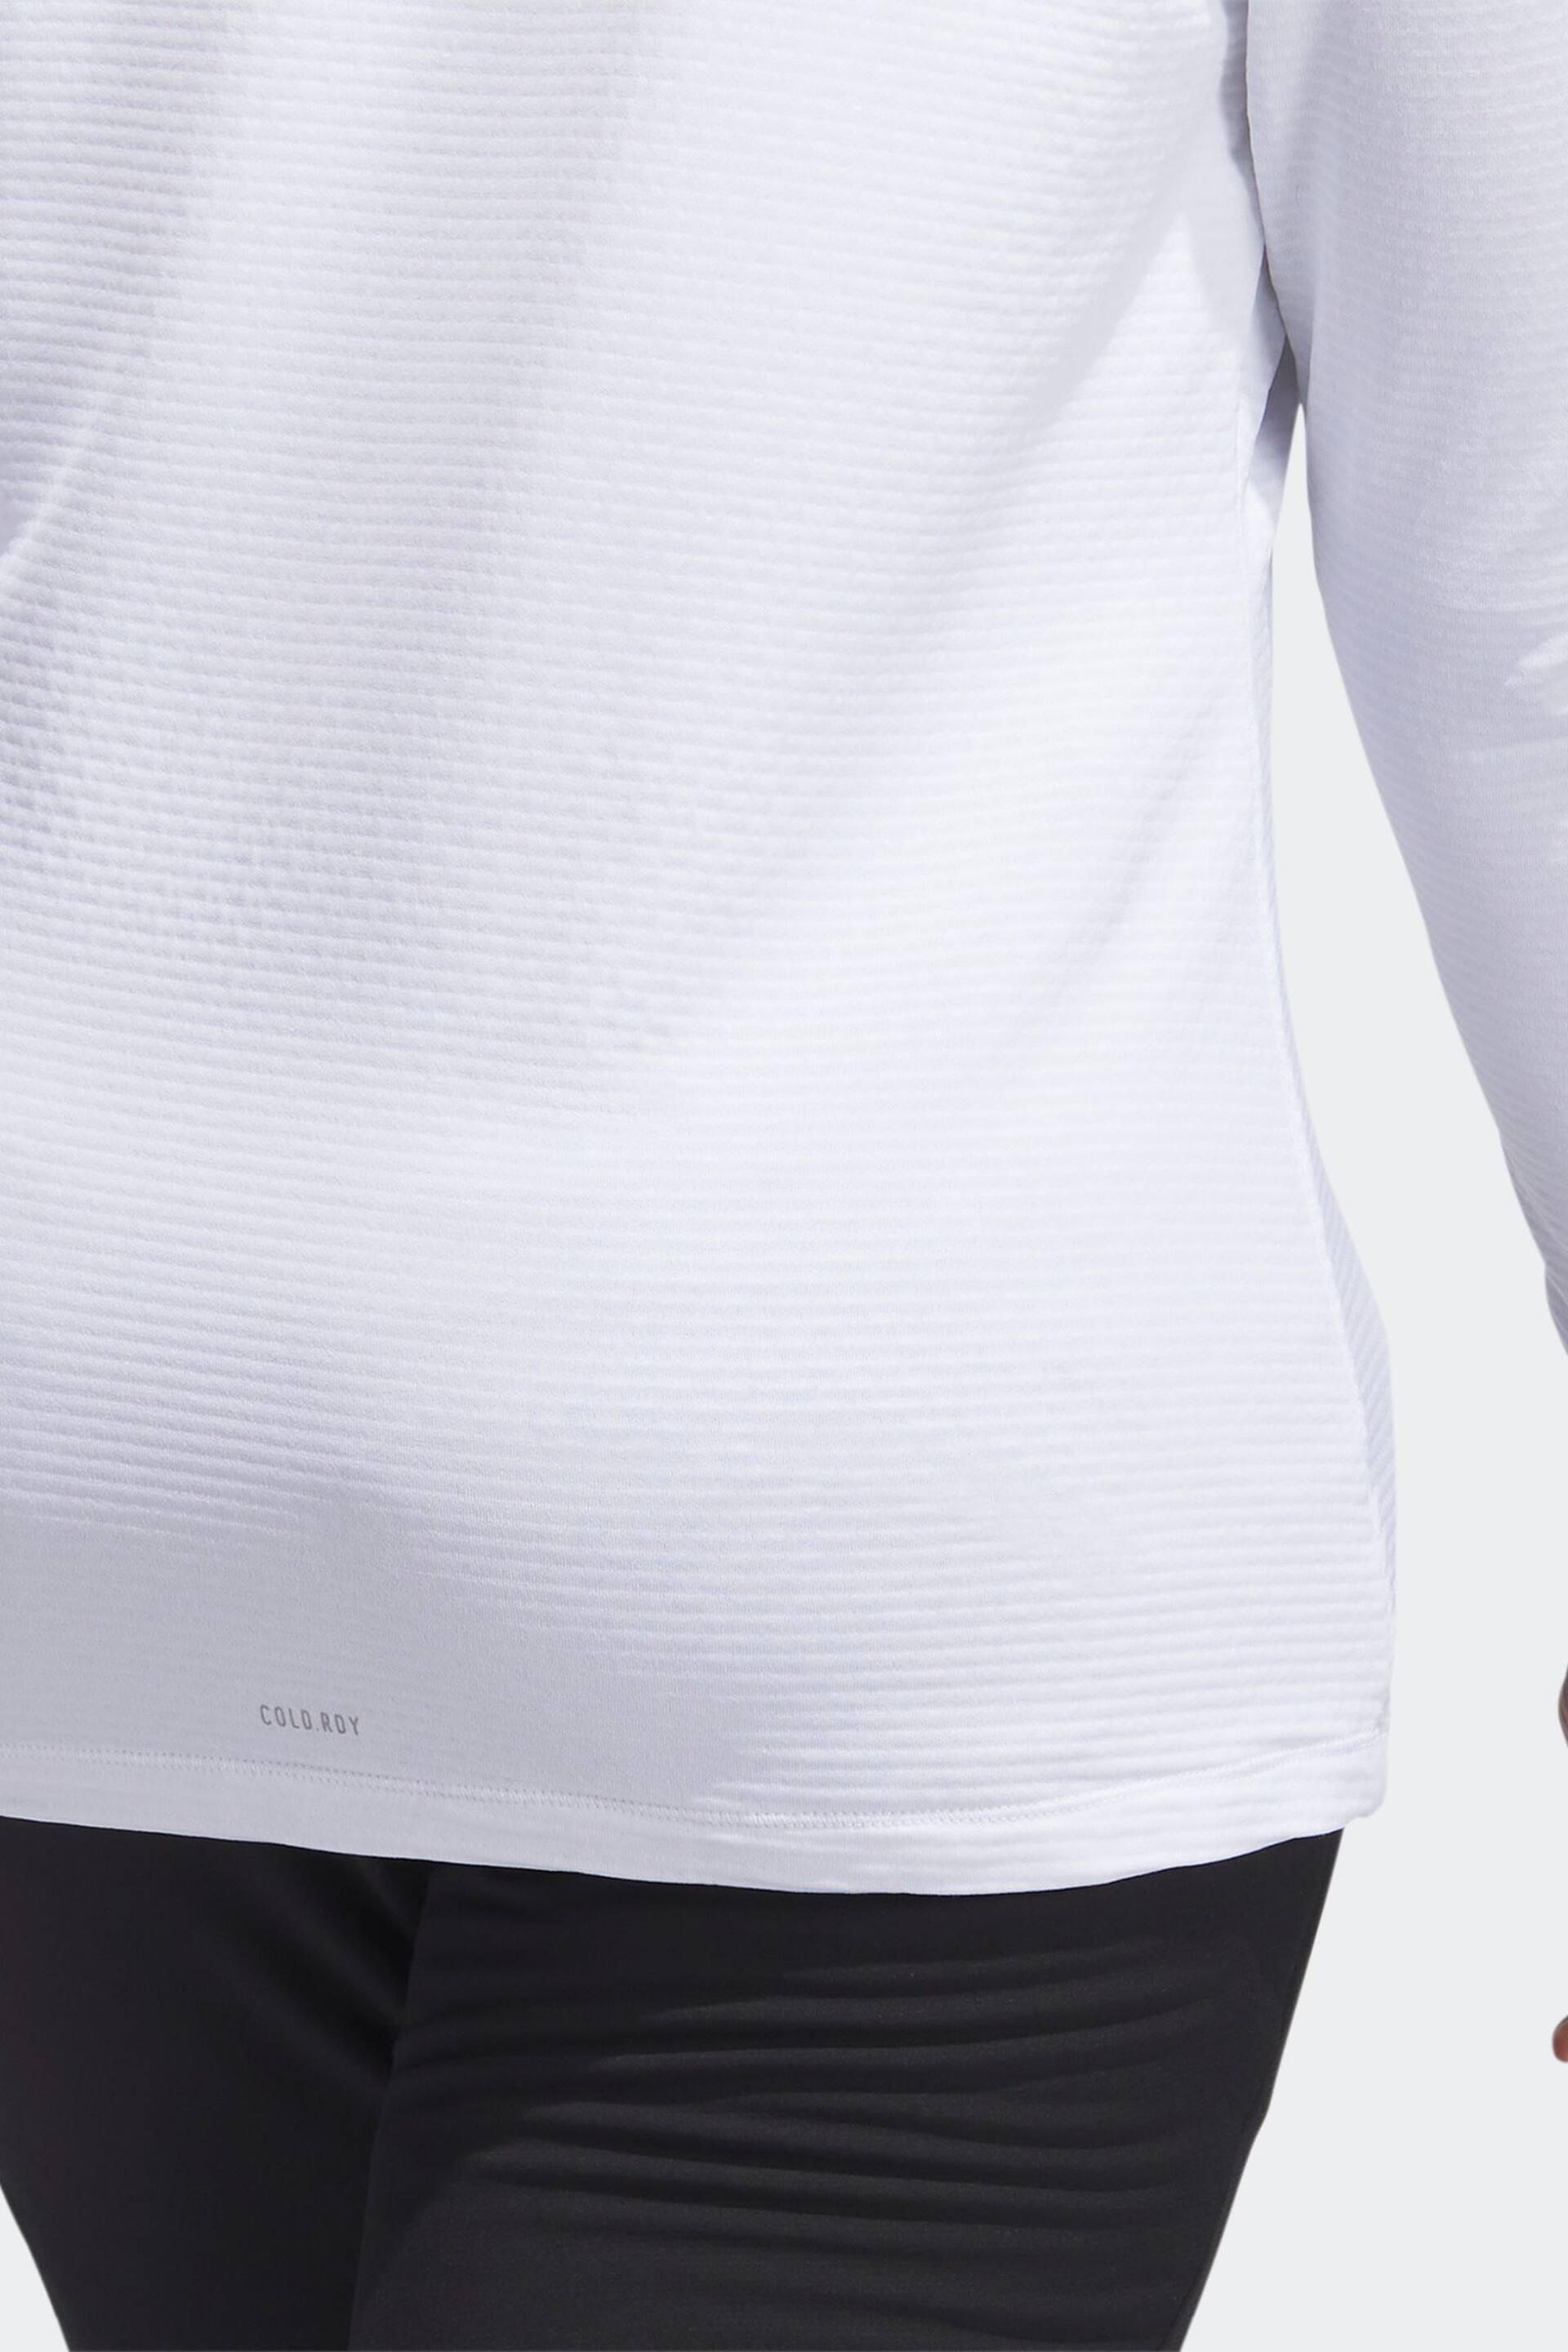 adidas Golf COLD.RDY Long Sleeve Mock T-shirt - Image 5 of 7